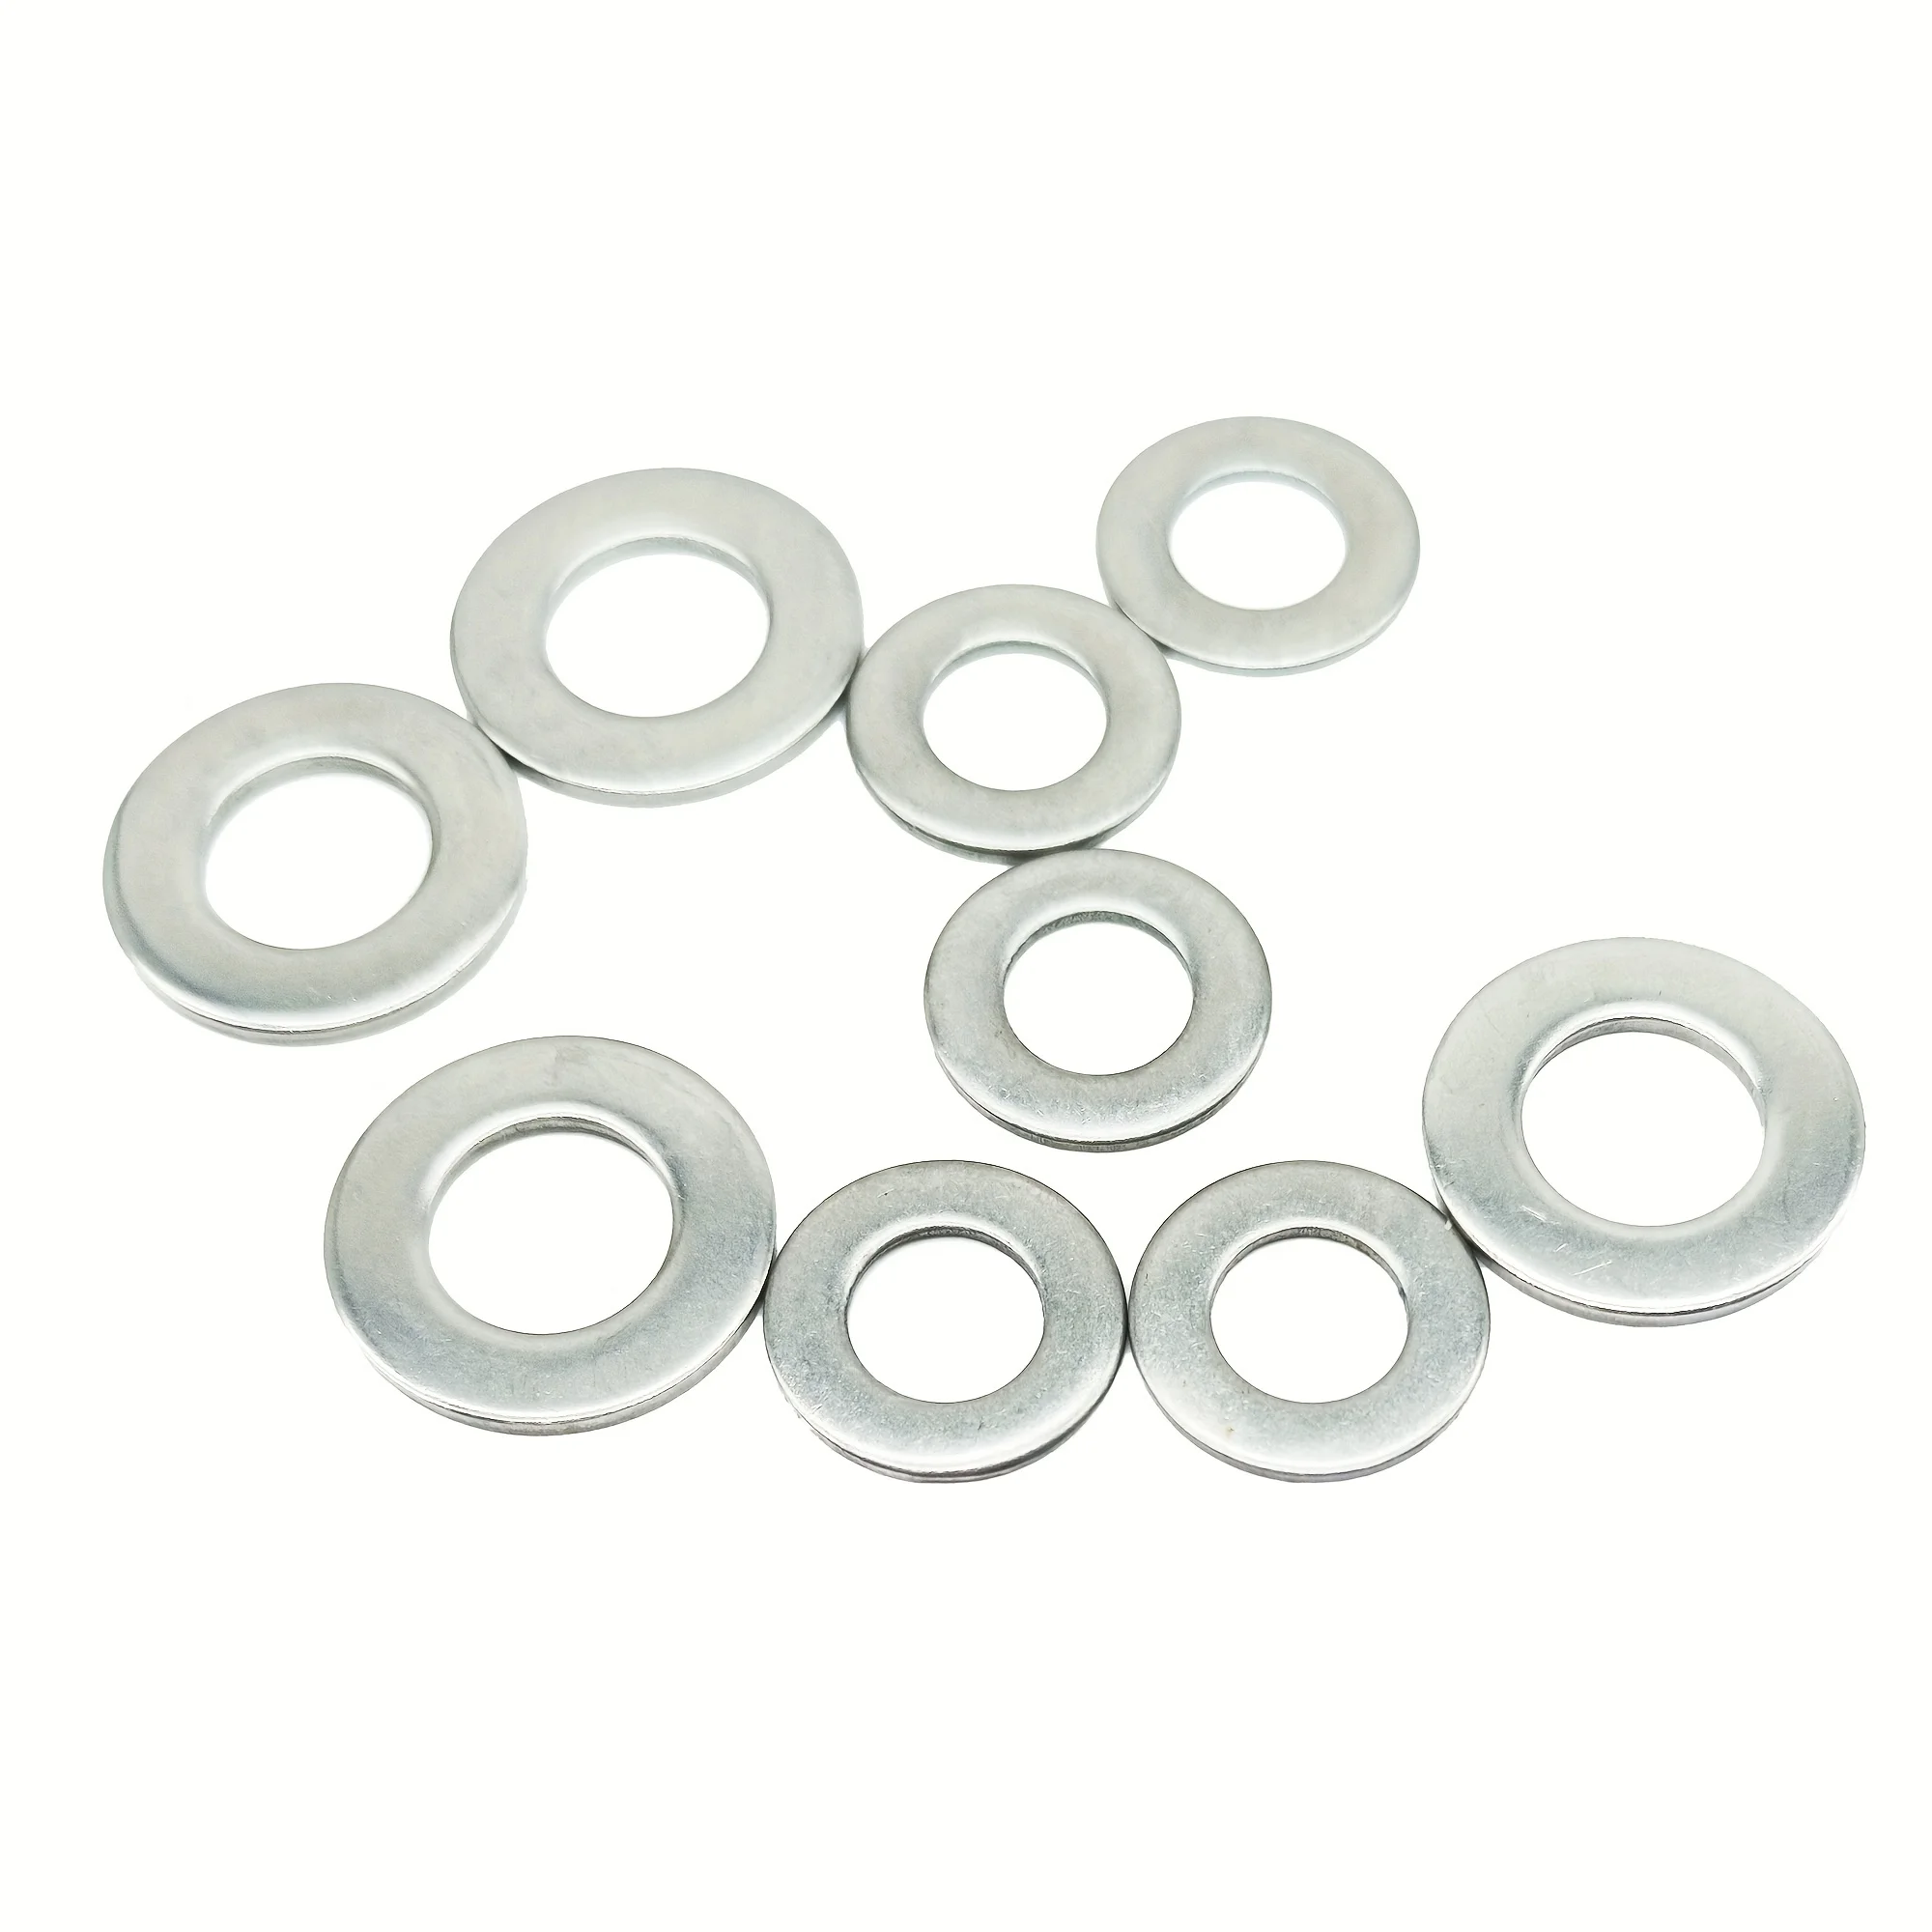 304 Stainless Steel Flat Washers Set 400 Pieces, 8 Sizes - M2 M2.5 M3 M4 M5 M6 M8 M10 Suitable for Home Decoration, Factories Re